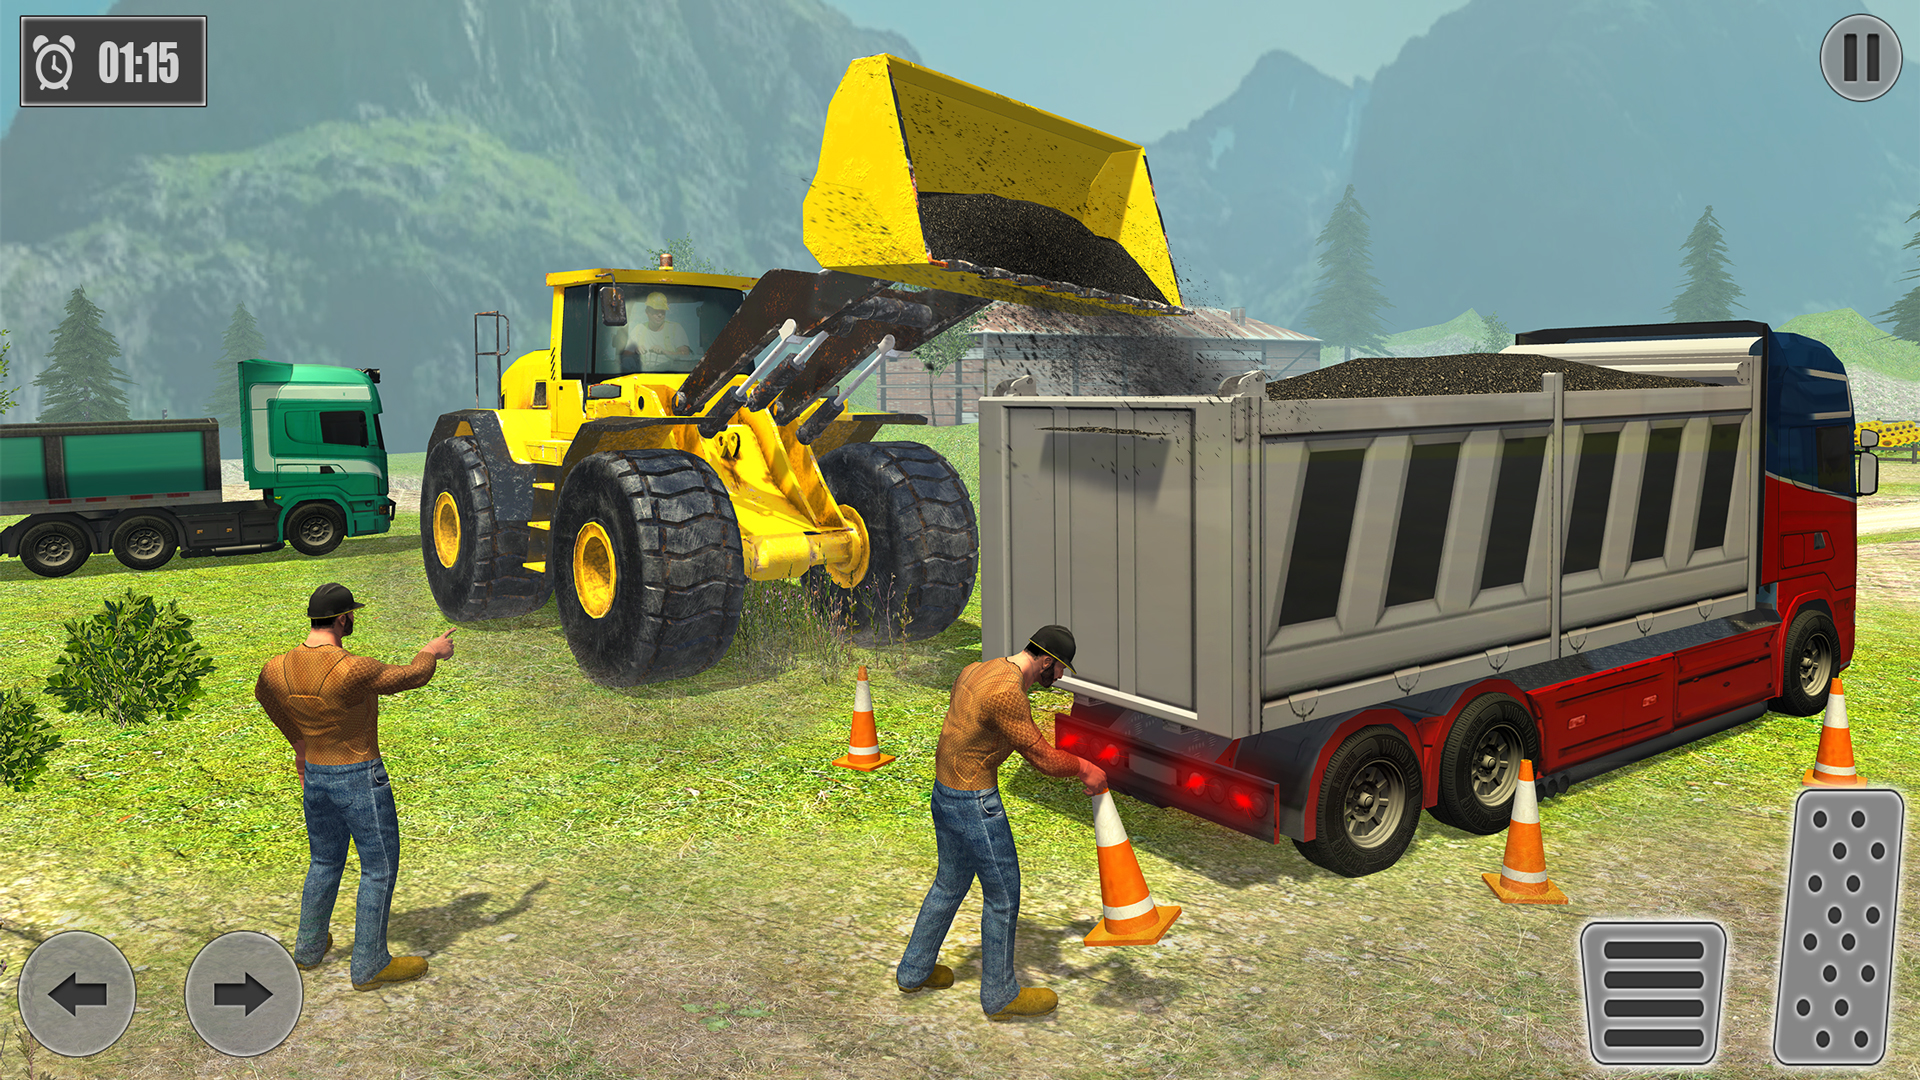 Baixar Uphill Truck: Offroad Games 3D para Android grátis.